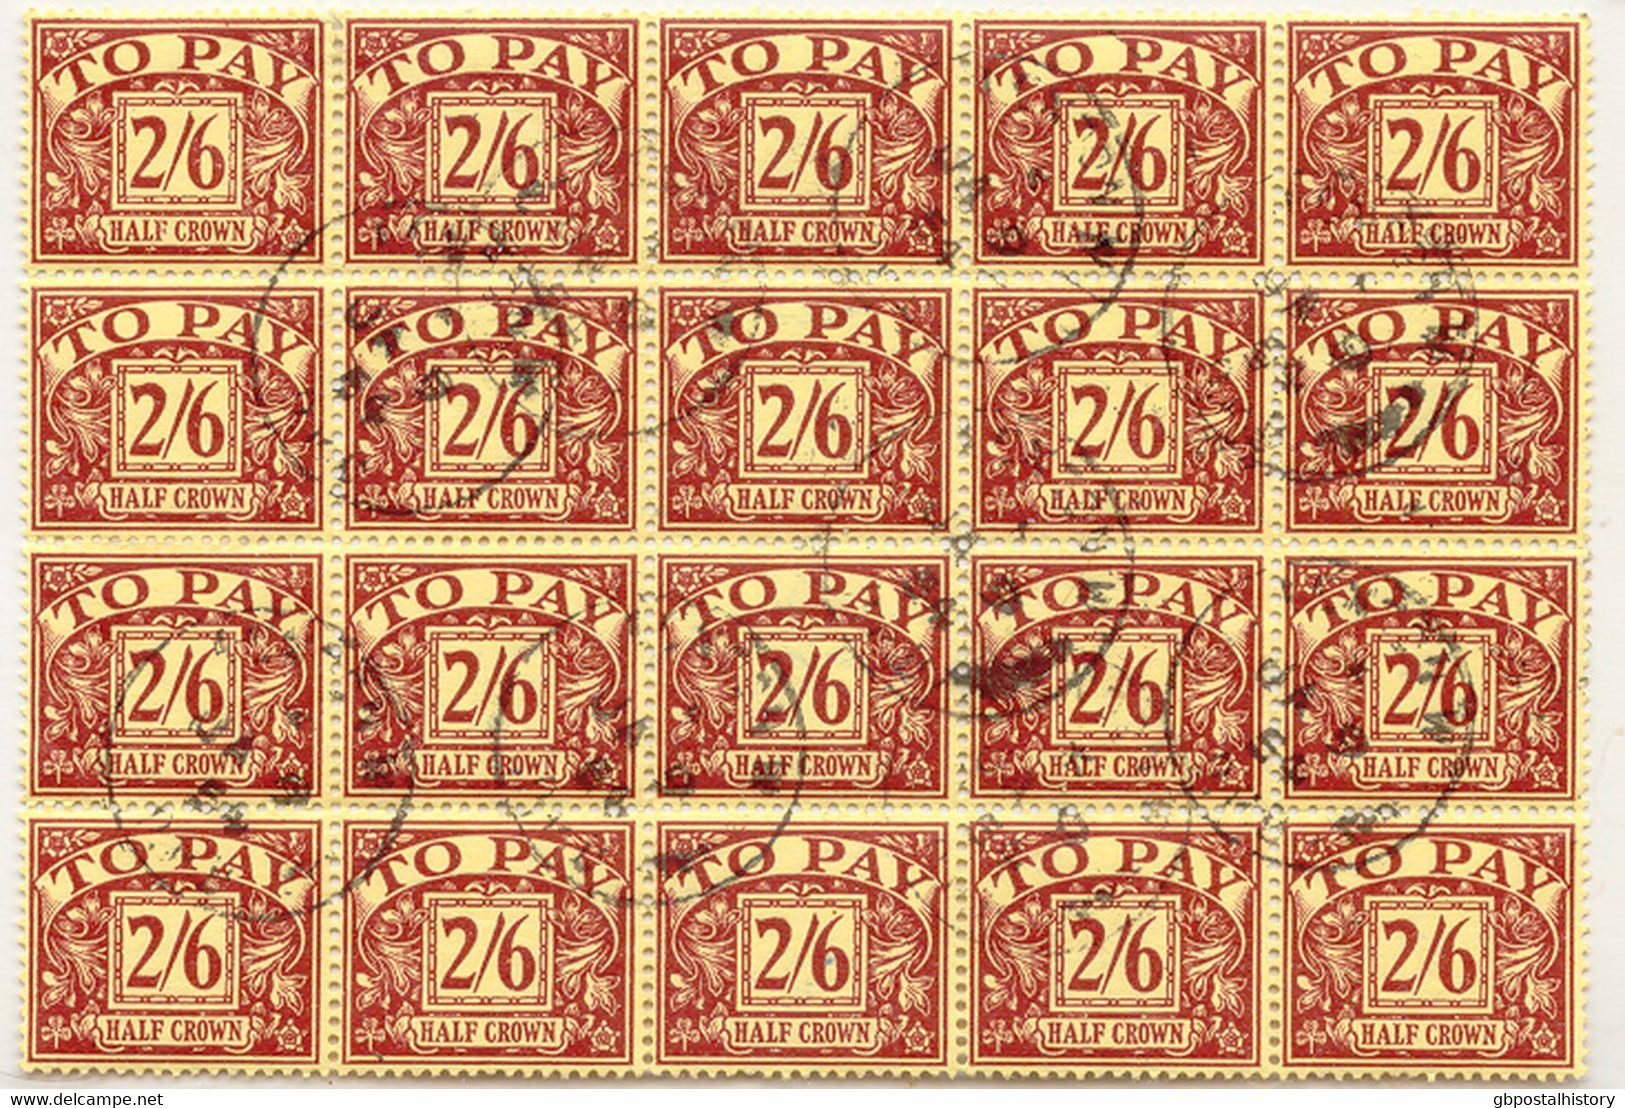 GB POSTAGE DUE 1938, Postage Due 2 Sh. 6 P Brown On Yellow, Extremely Rare Large Used Unit Of 20 Items, One Stamp With - Tasse